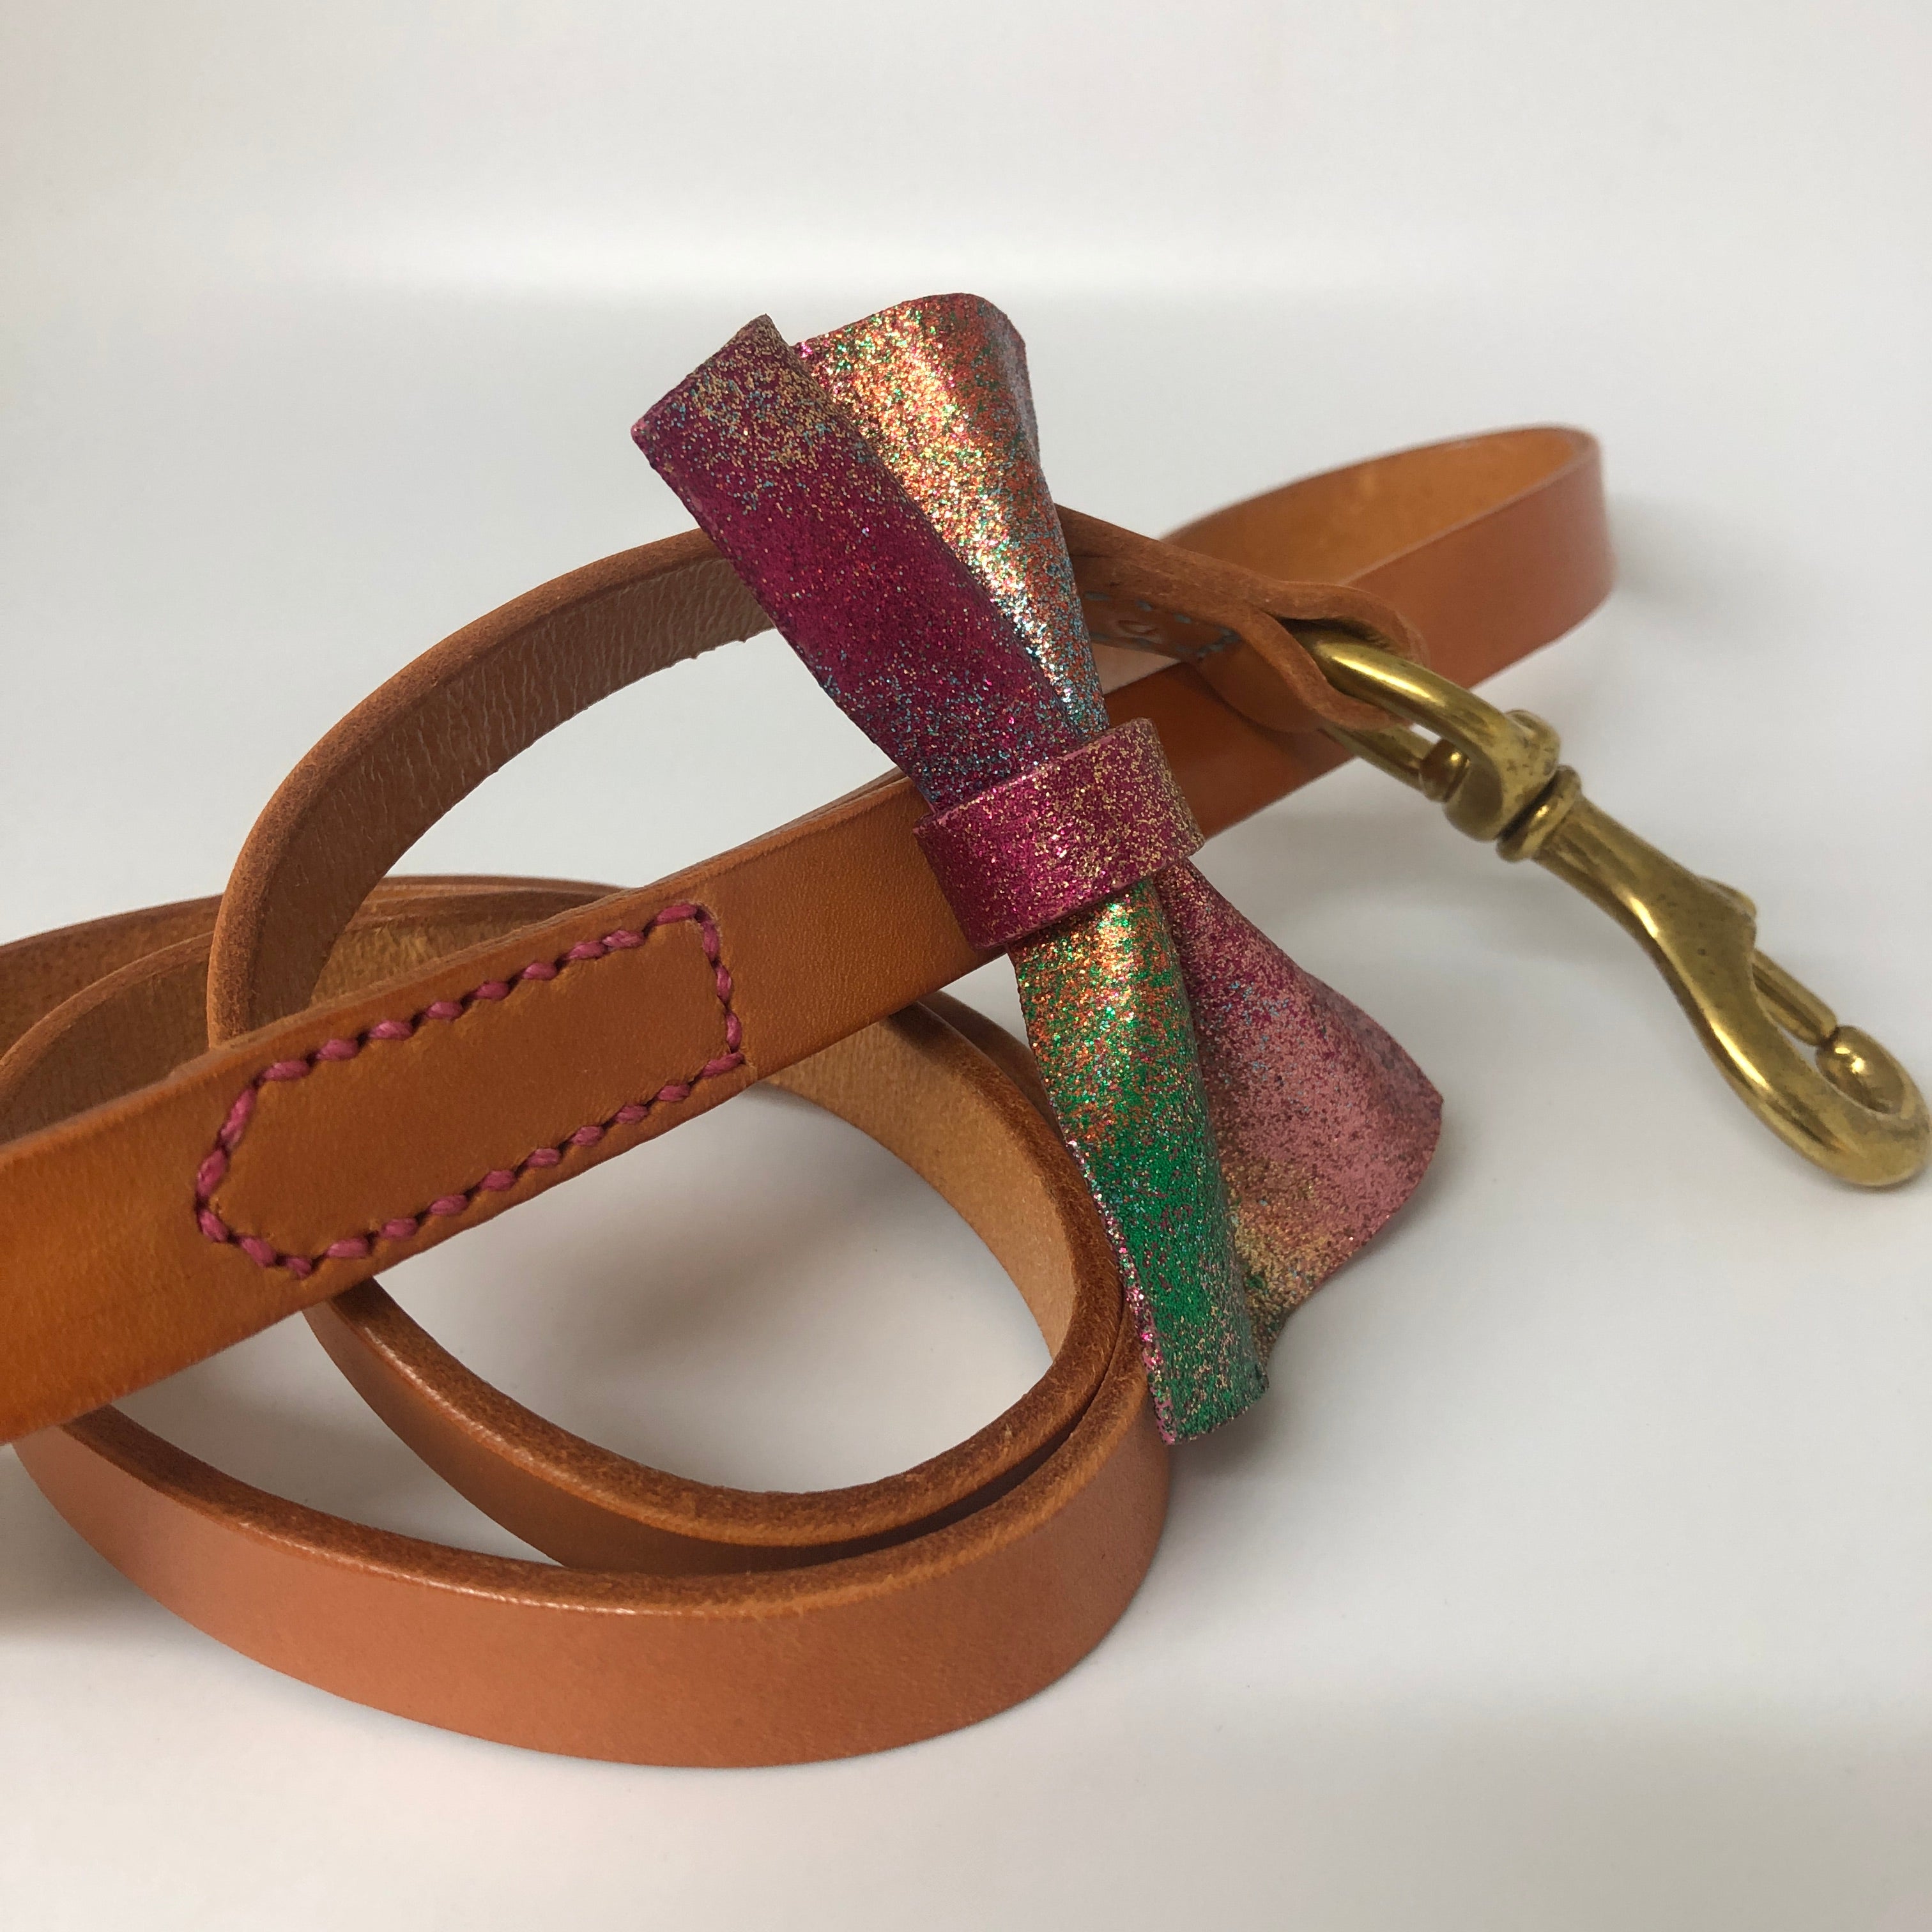 Natural Nude & Rainbow Bow Tie Leather Dog Leash